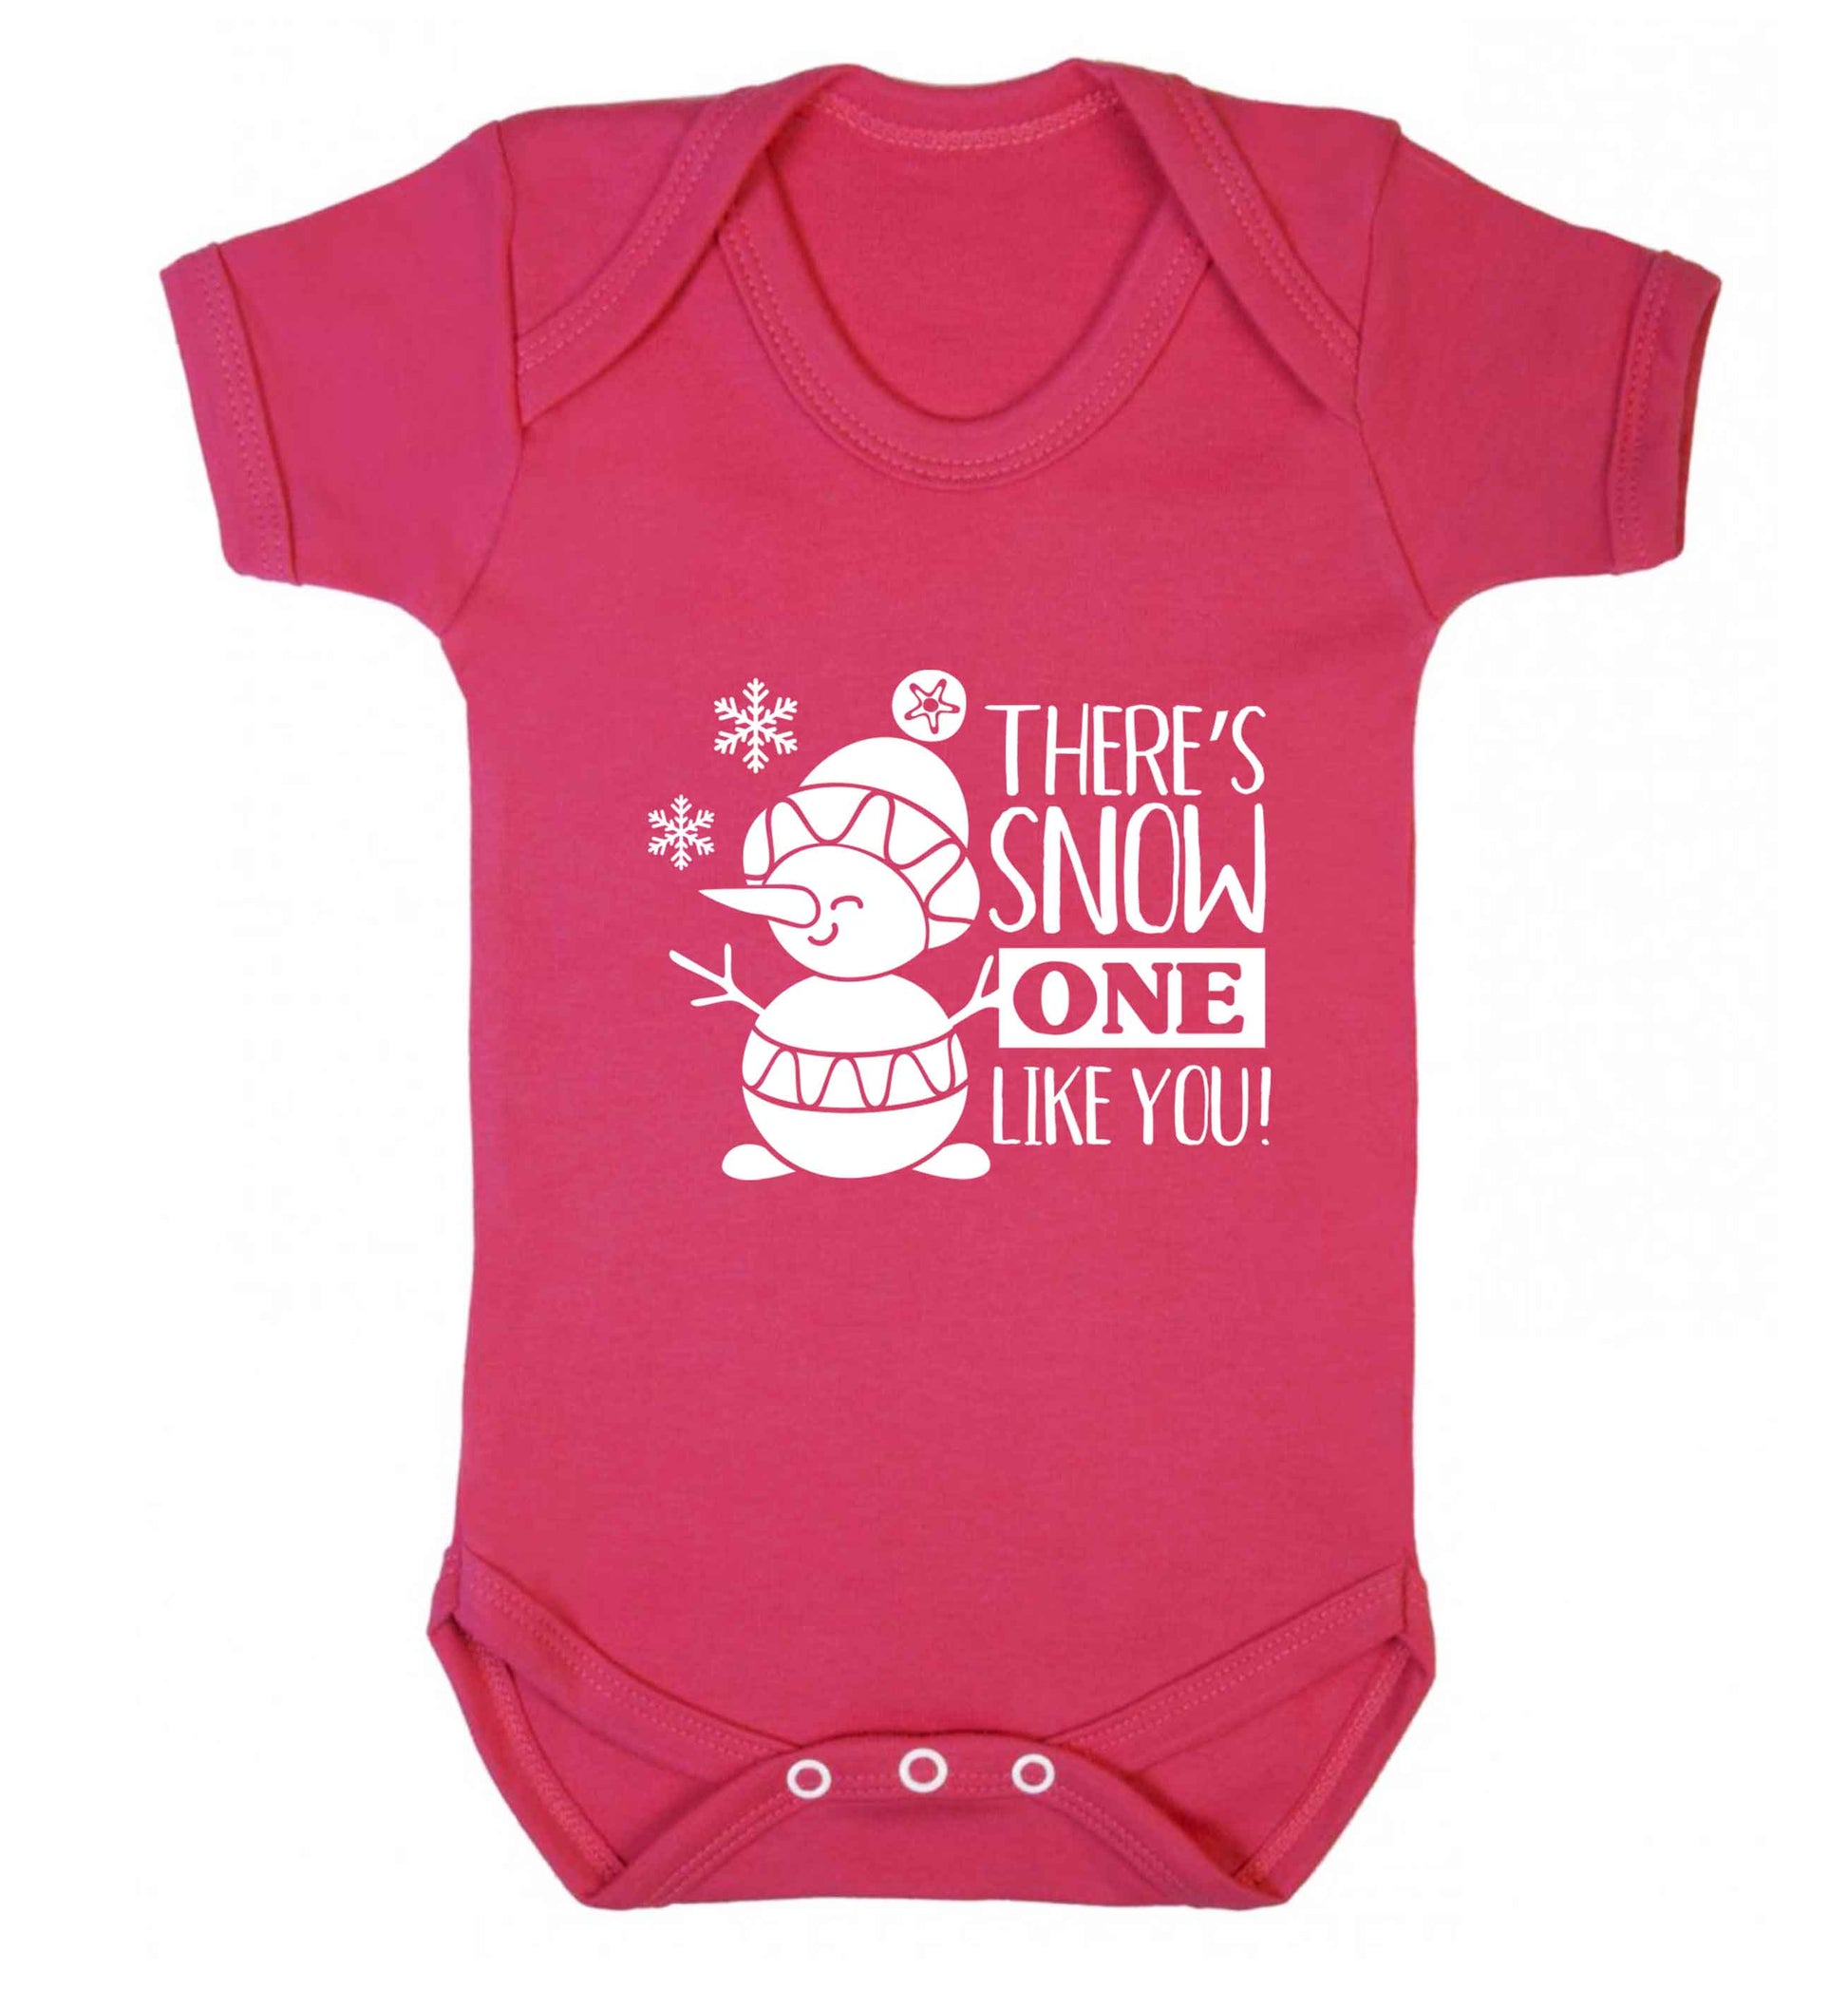 There's snow one like you baby vest dark pink 18-24 months